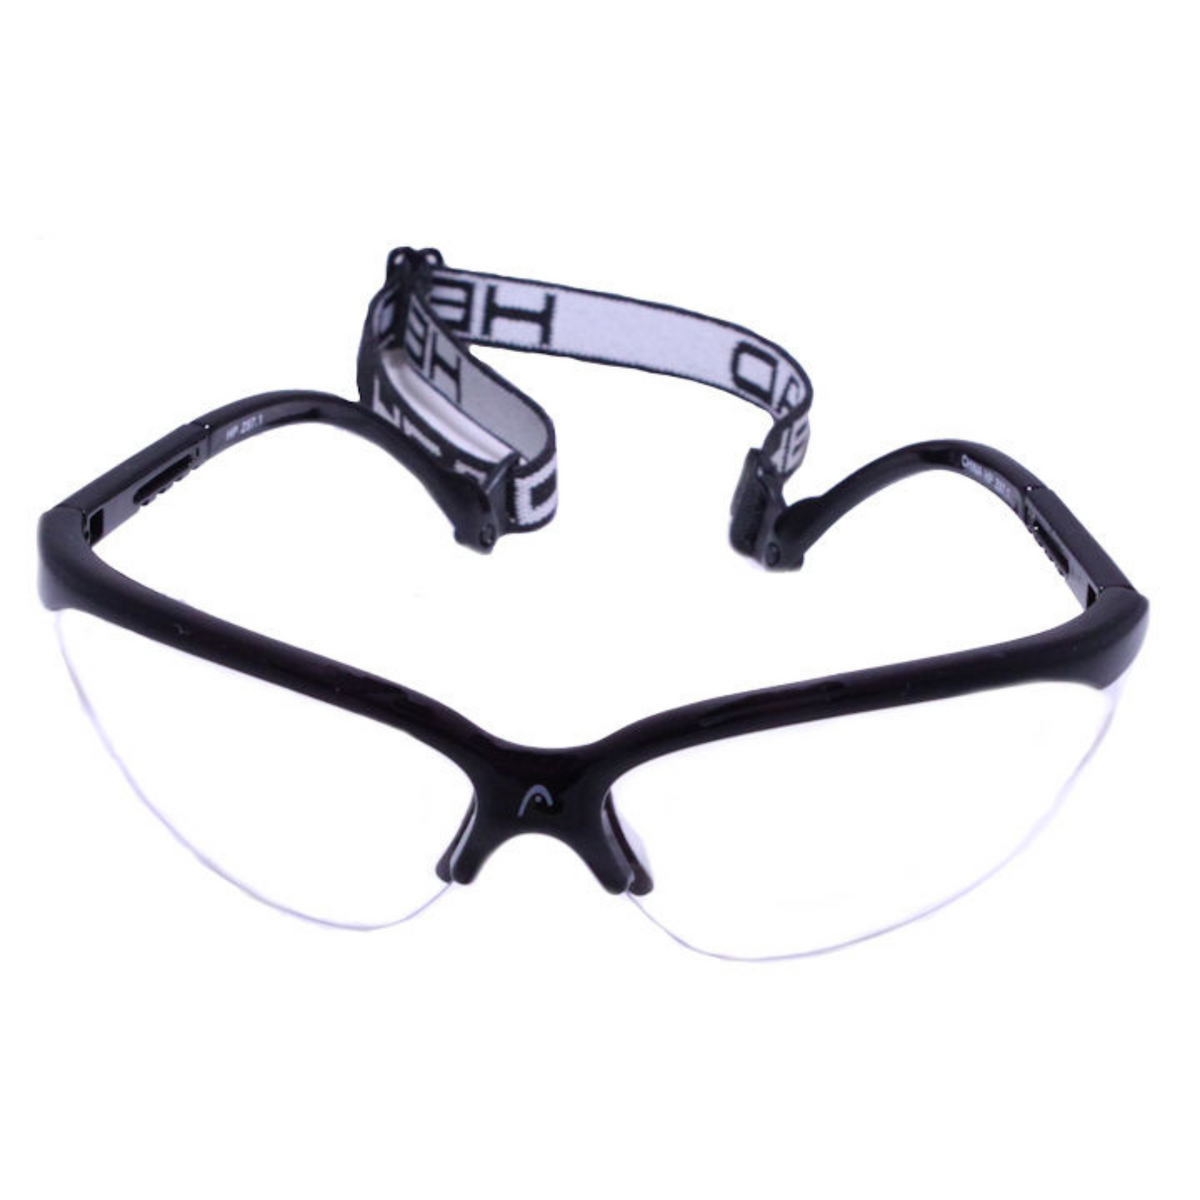 Front view of head racquet goggles for pickleball, tennis, squash, padel, and racquetball